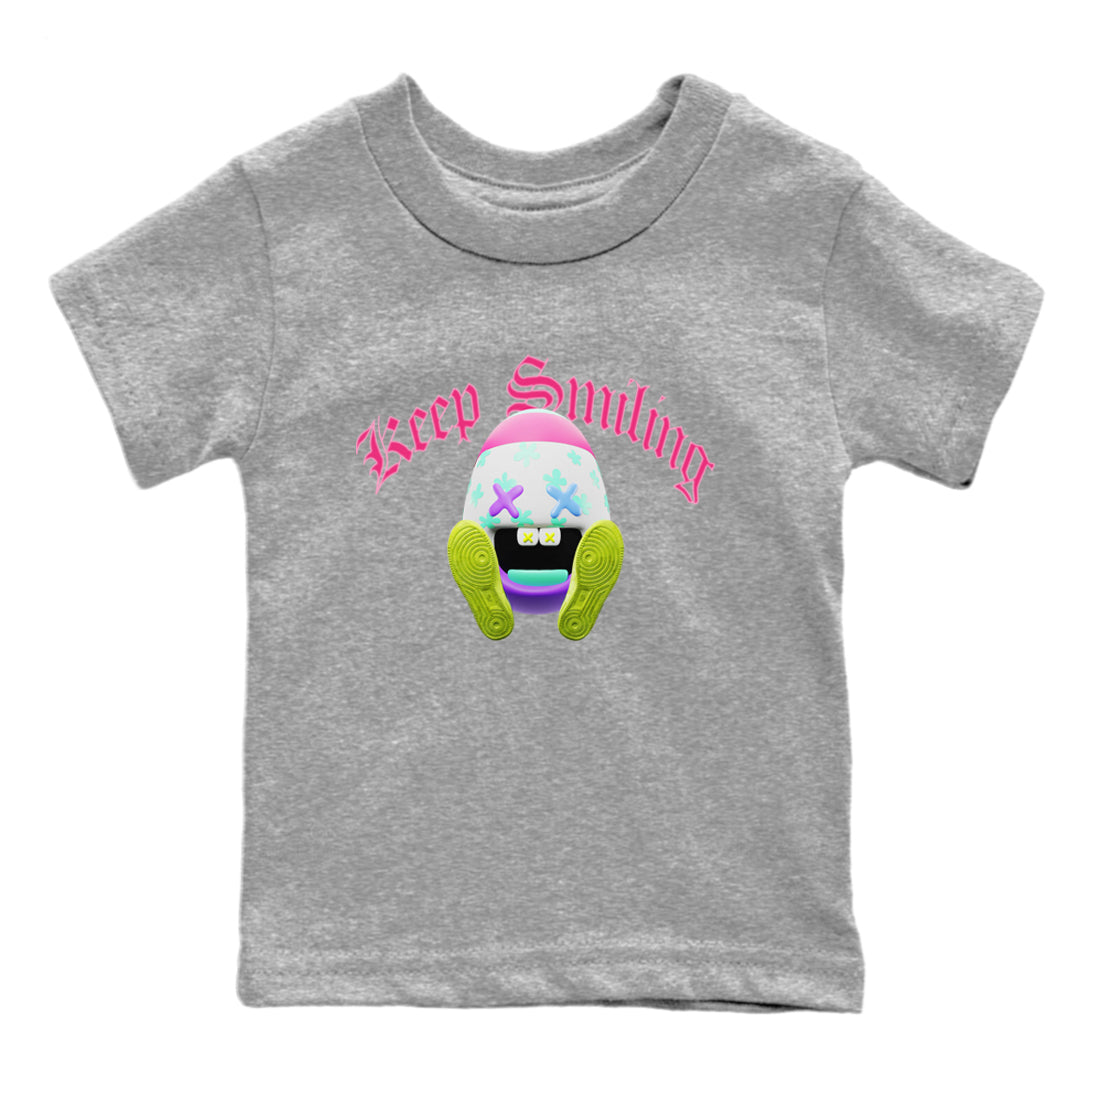 Dunk Easter Candy Sneaker Tees Drip Gear Zone Keep Smiling Sneaker Tees Nike Easter Shirt Kids Shirts Heather Grey 2